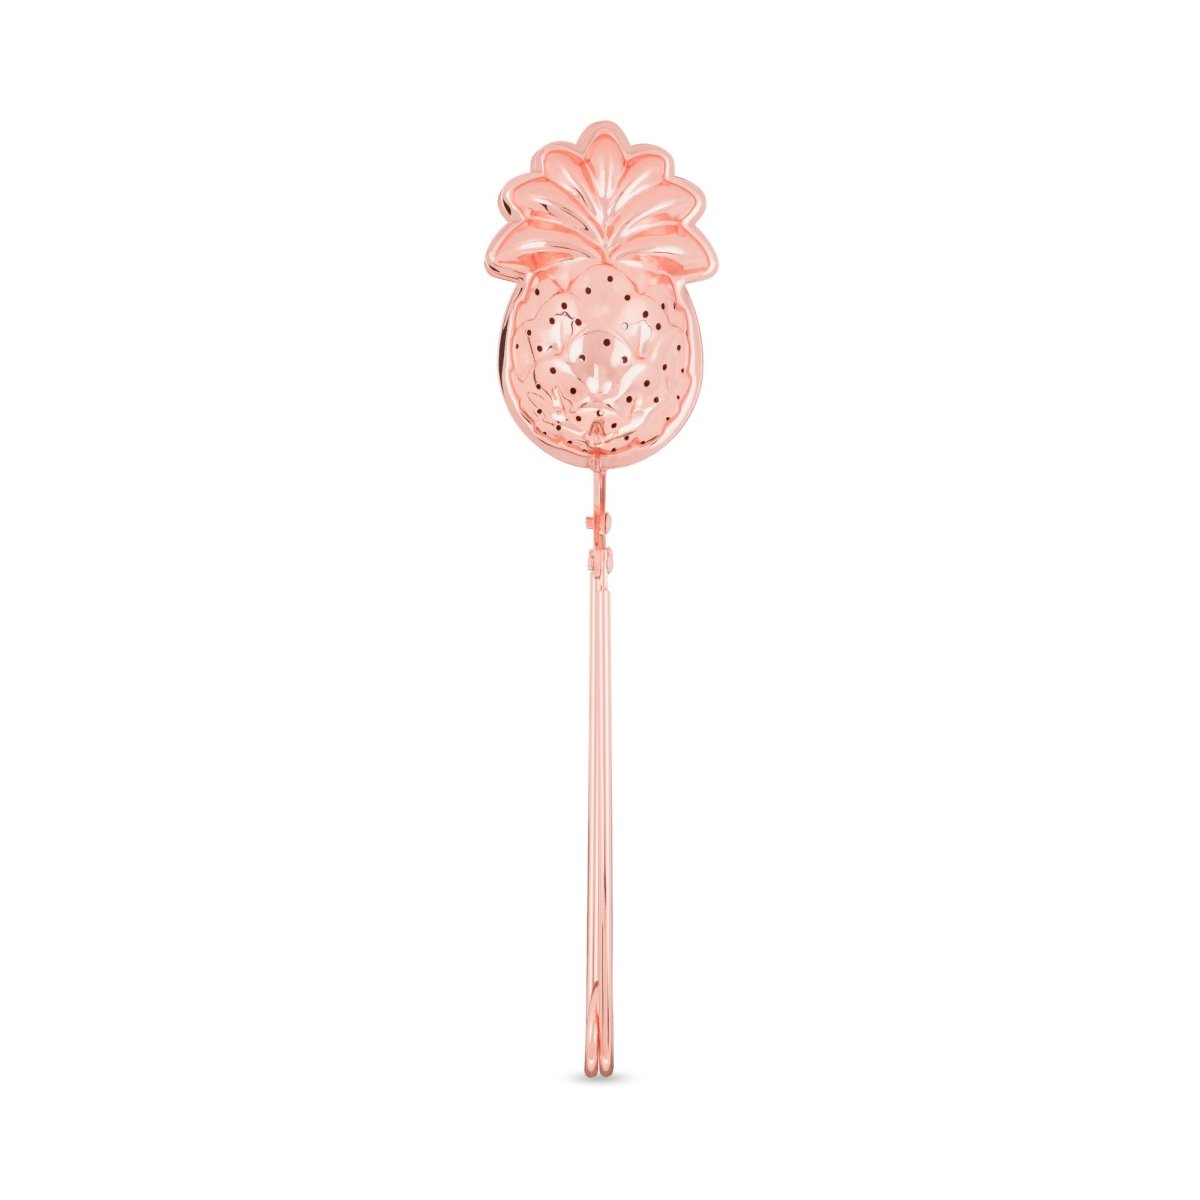 Pinky Up Rose Gold Pineapple Tea Infuser - lily & onyx